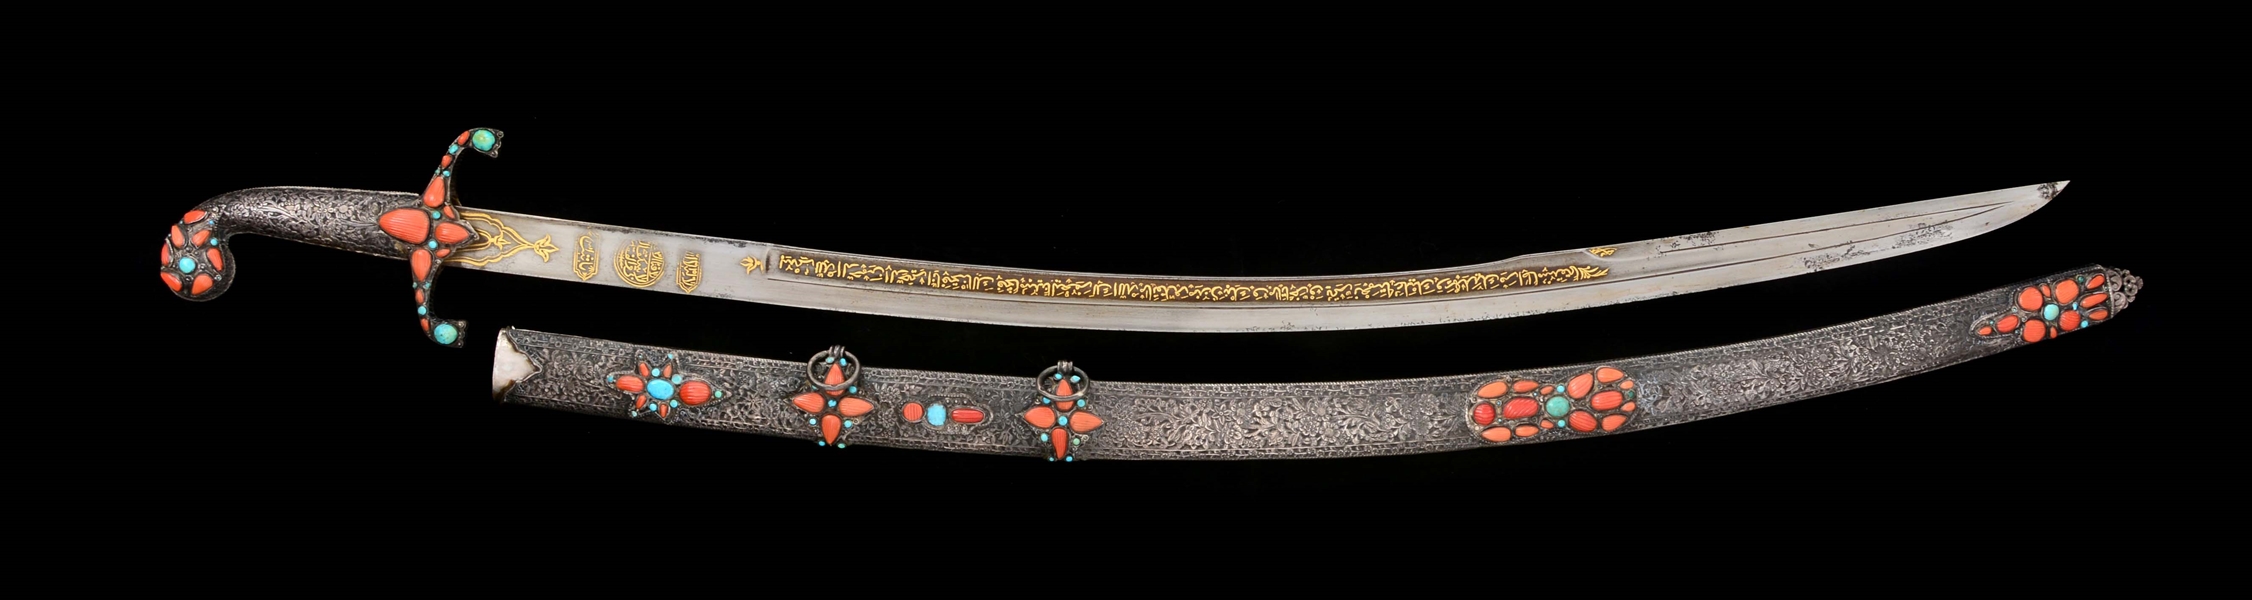 FINE OTTOMAN SILVER MOUNTED CORAL AND TURQUOISE ENCRUSTED KILIJ.